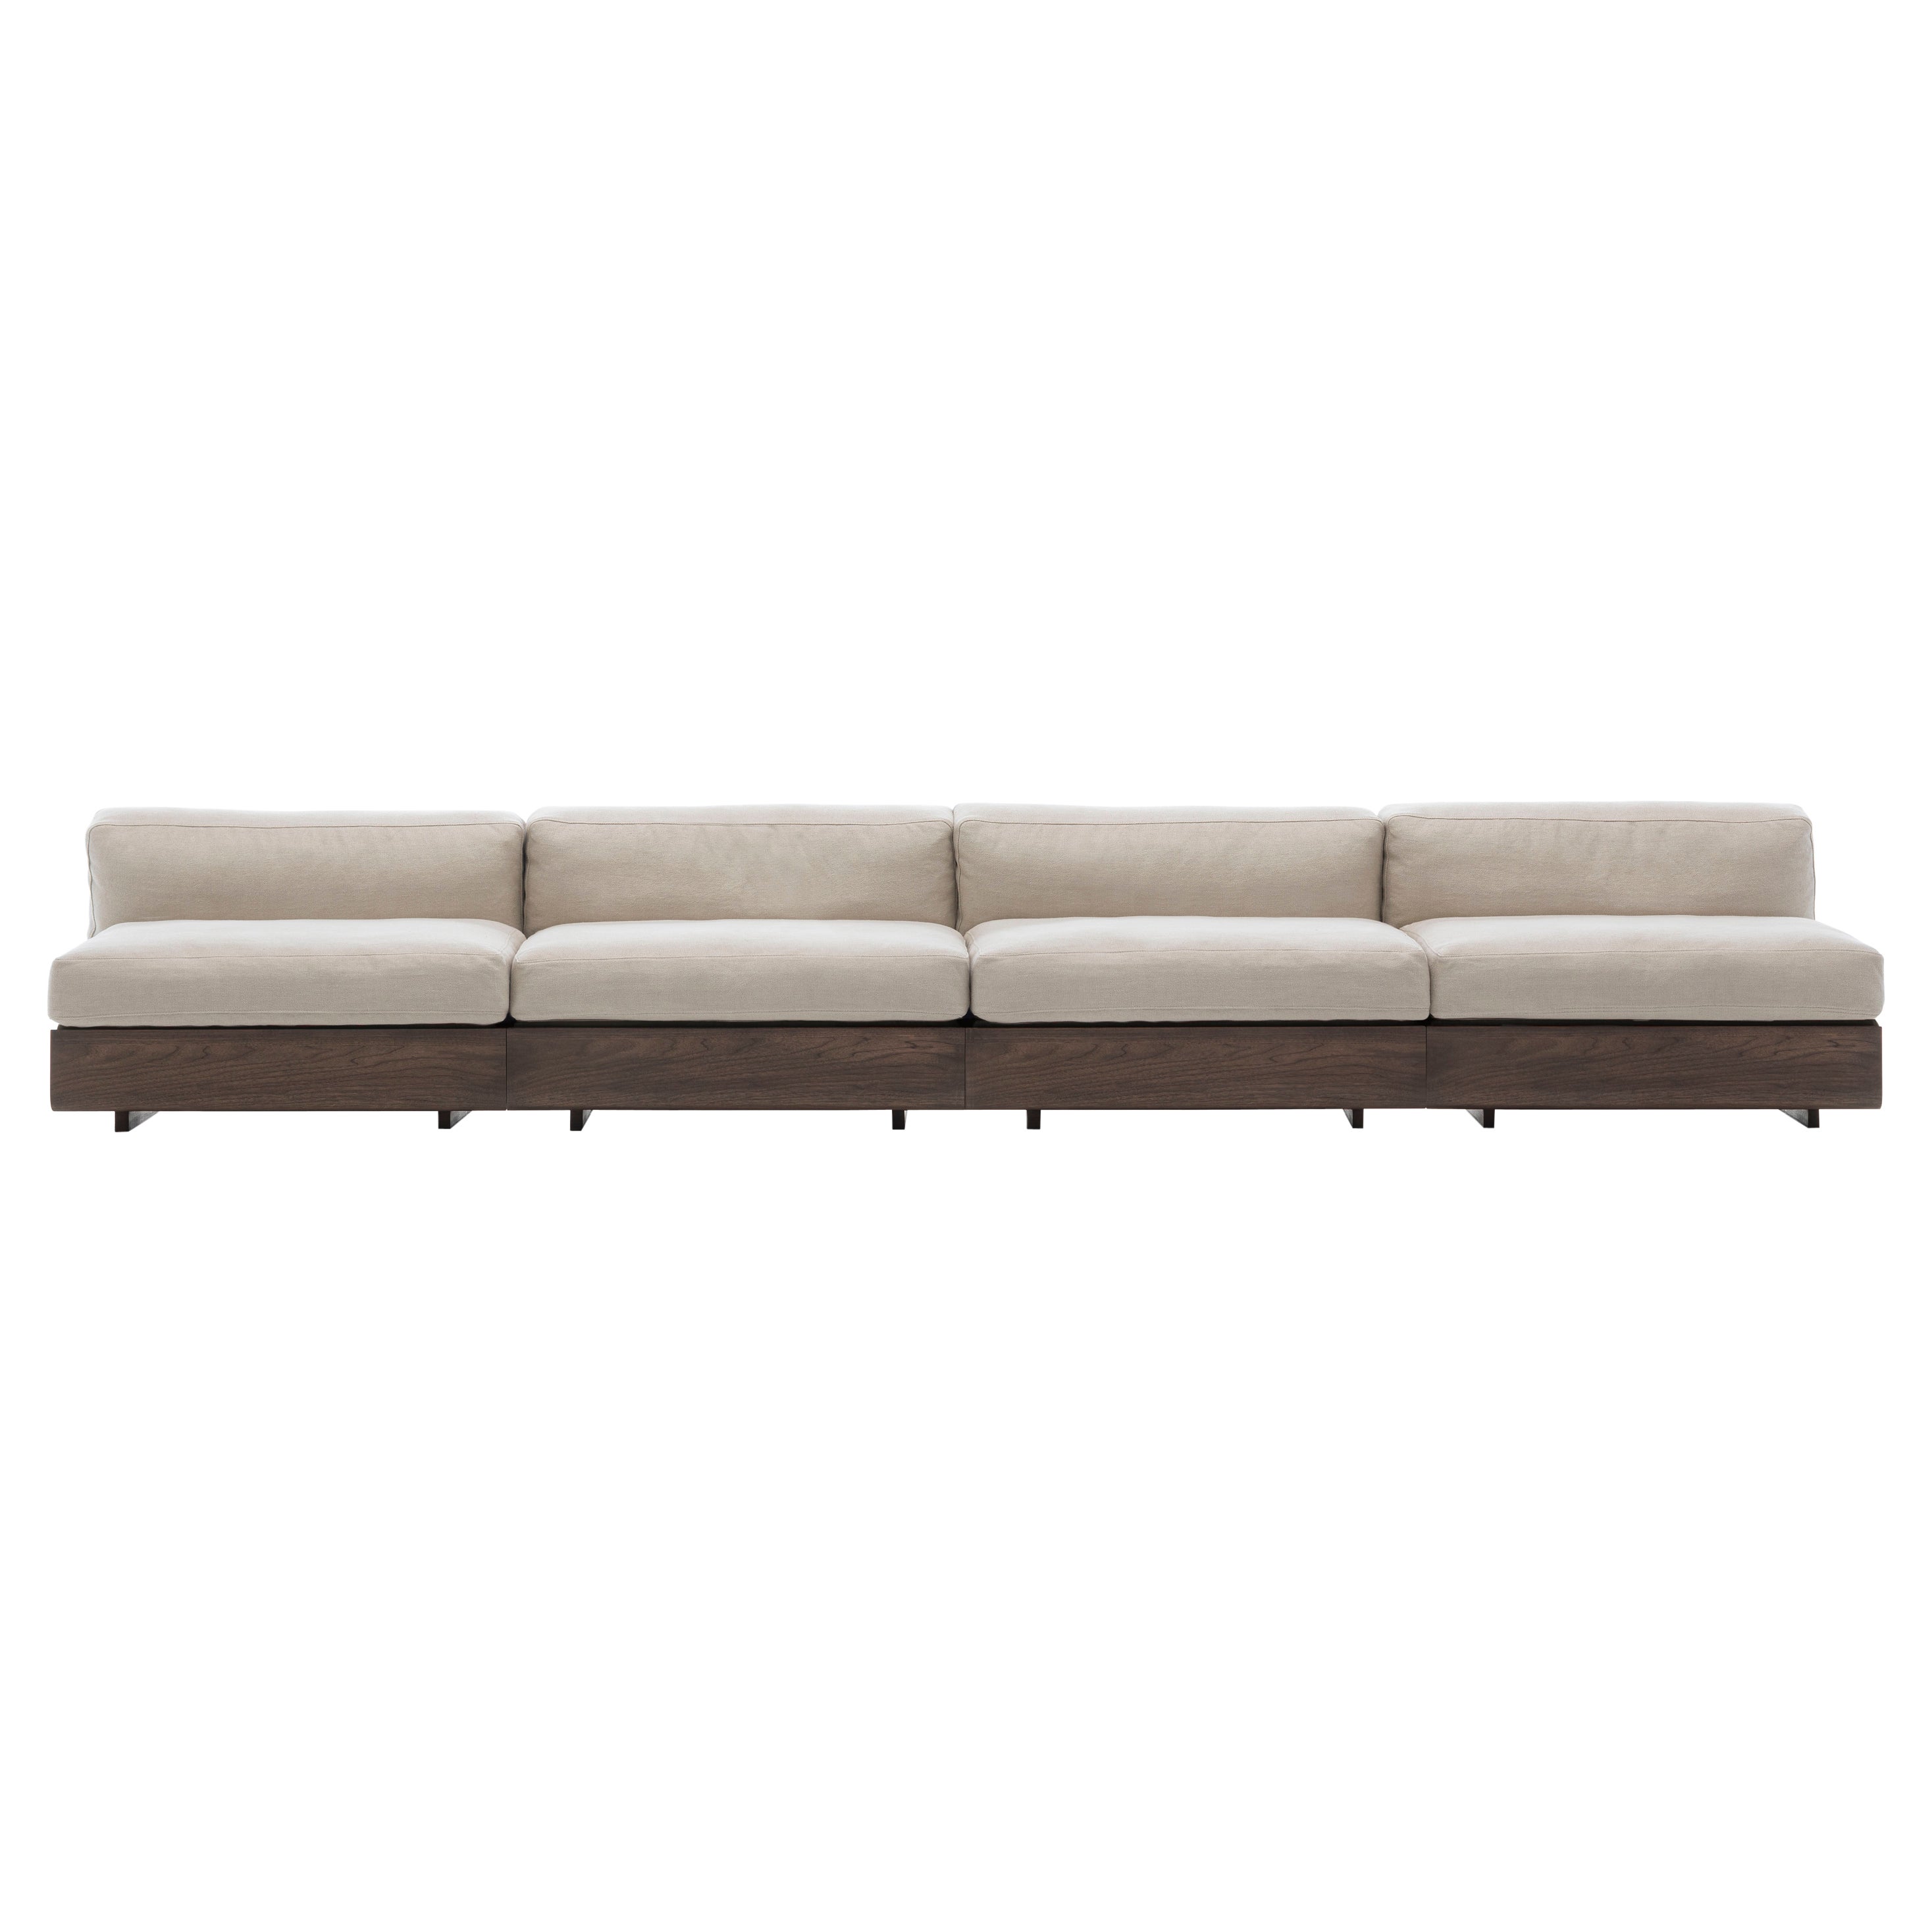 Acerbis Life Sofa in White Upholstery with Dark Stained Walnut Frame For Sale